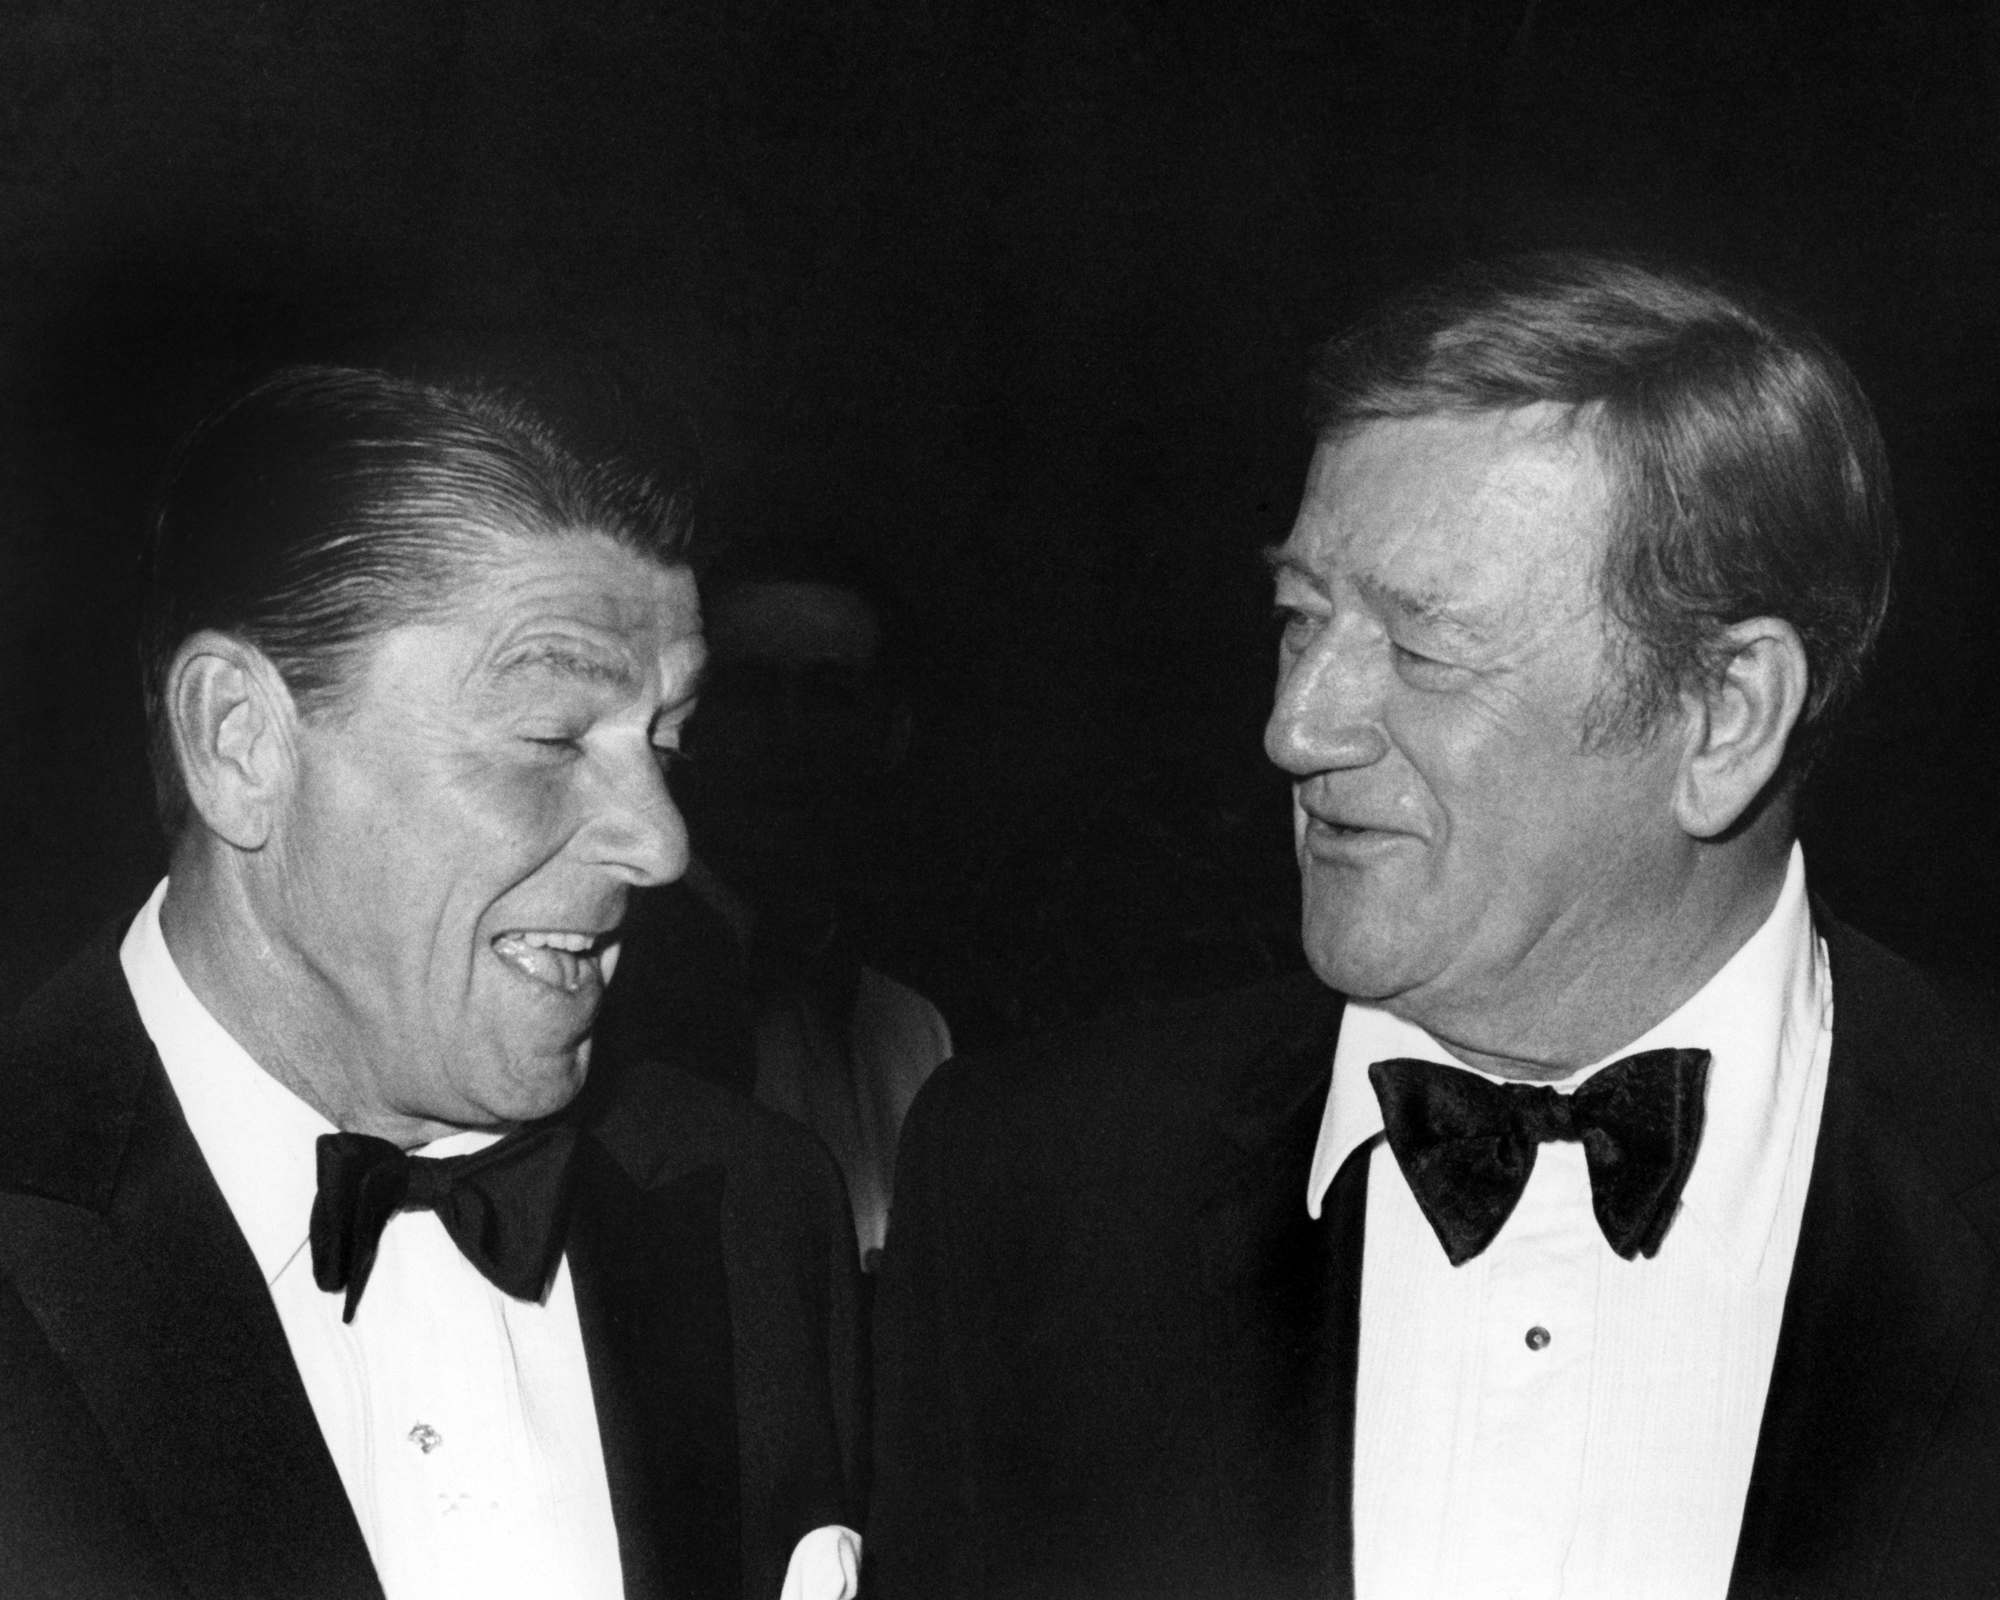 Ronald Reagan and John Wayne wearing tuxedos and talking in a black-and-white picture